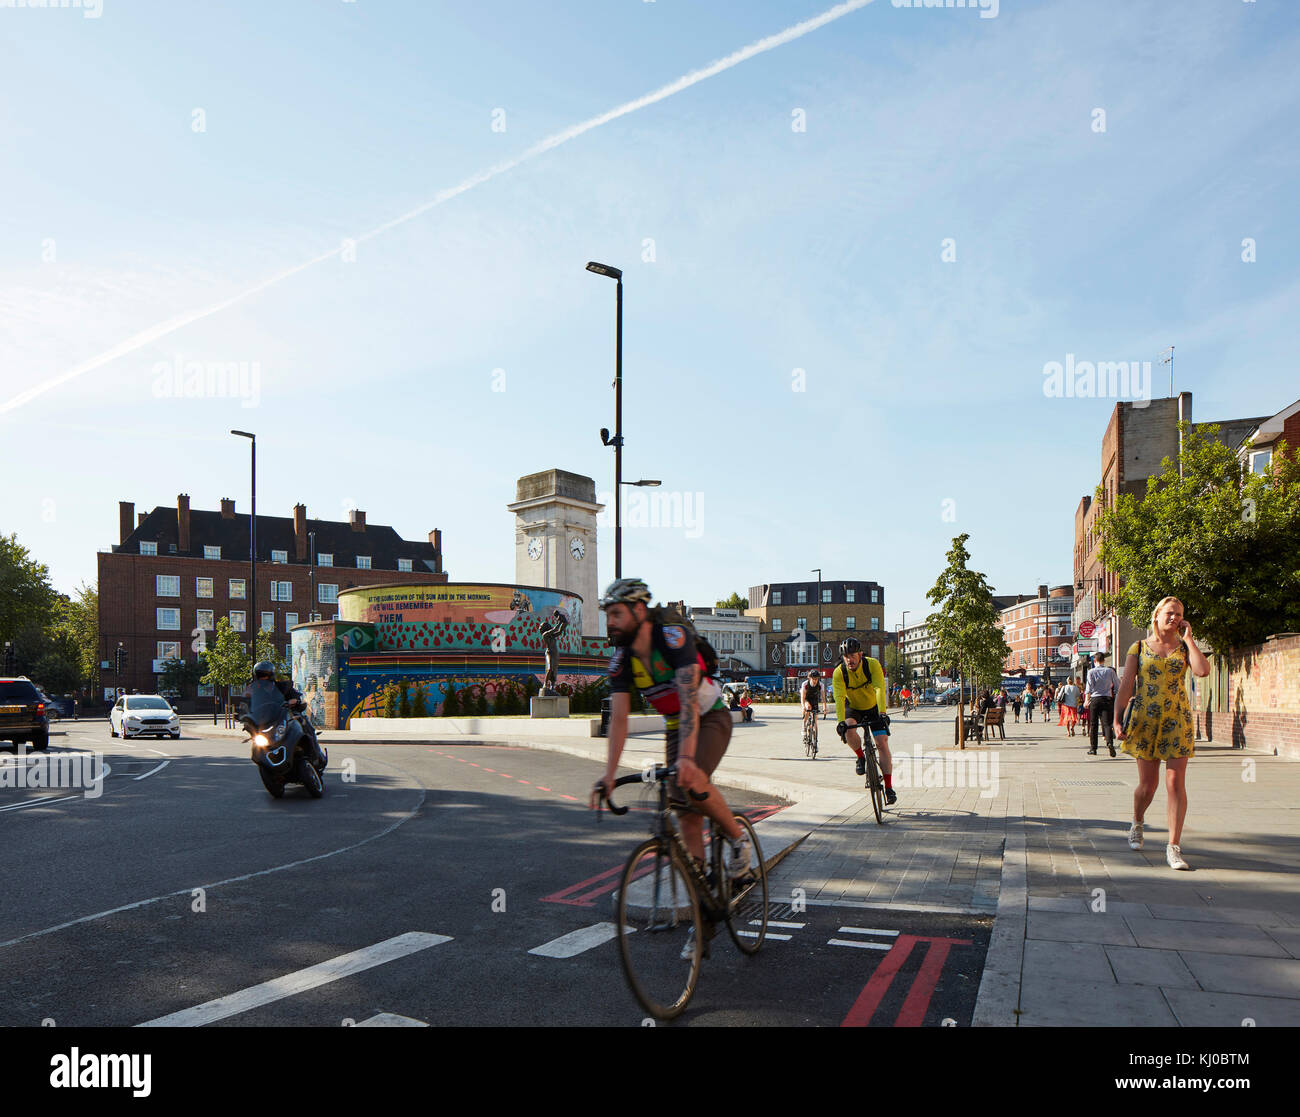 Reconfigured intersection with bicycle lane at Stockwell War Memorial. Stockwell Framework Masterplan, London, United Kingdom. Architect: DSDHA, 2017. Stock Photo